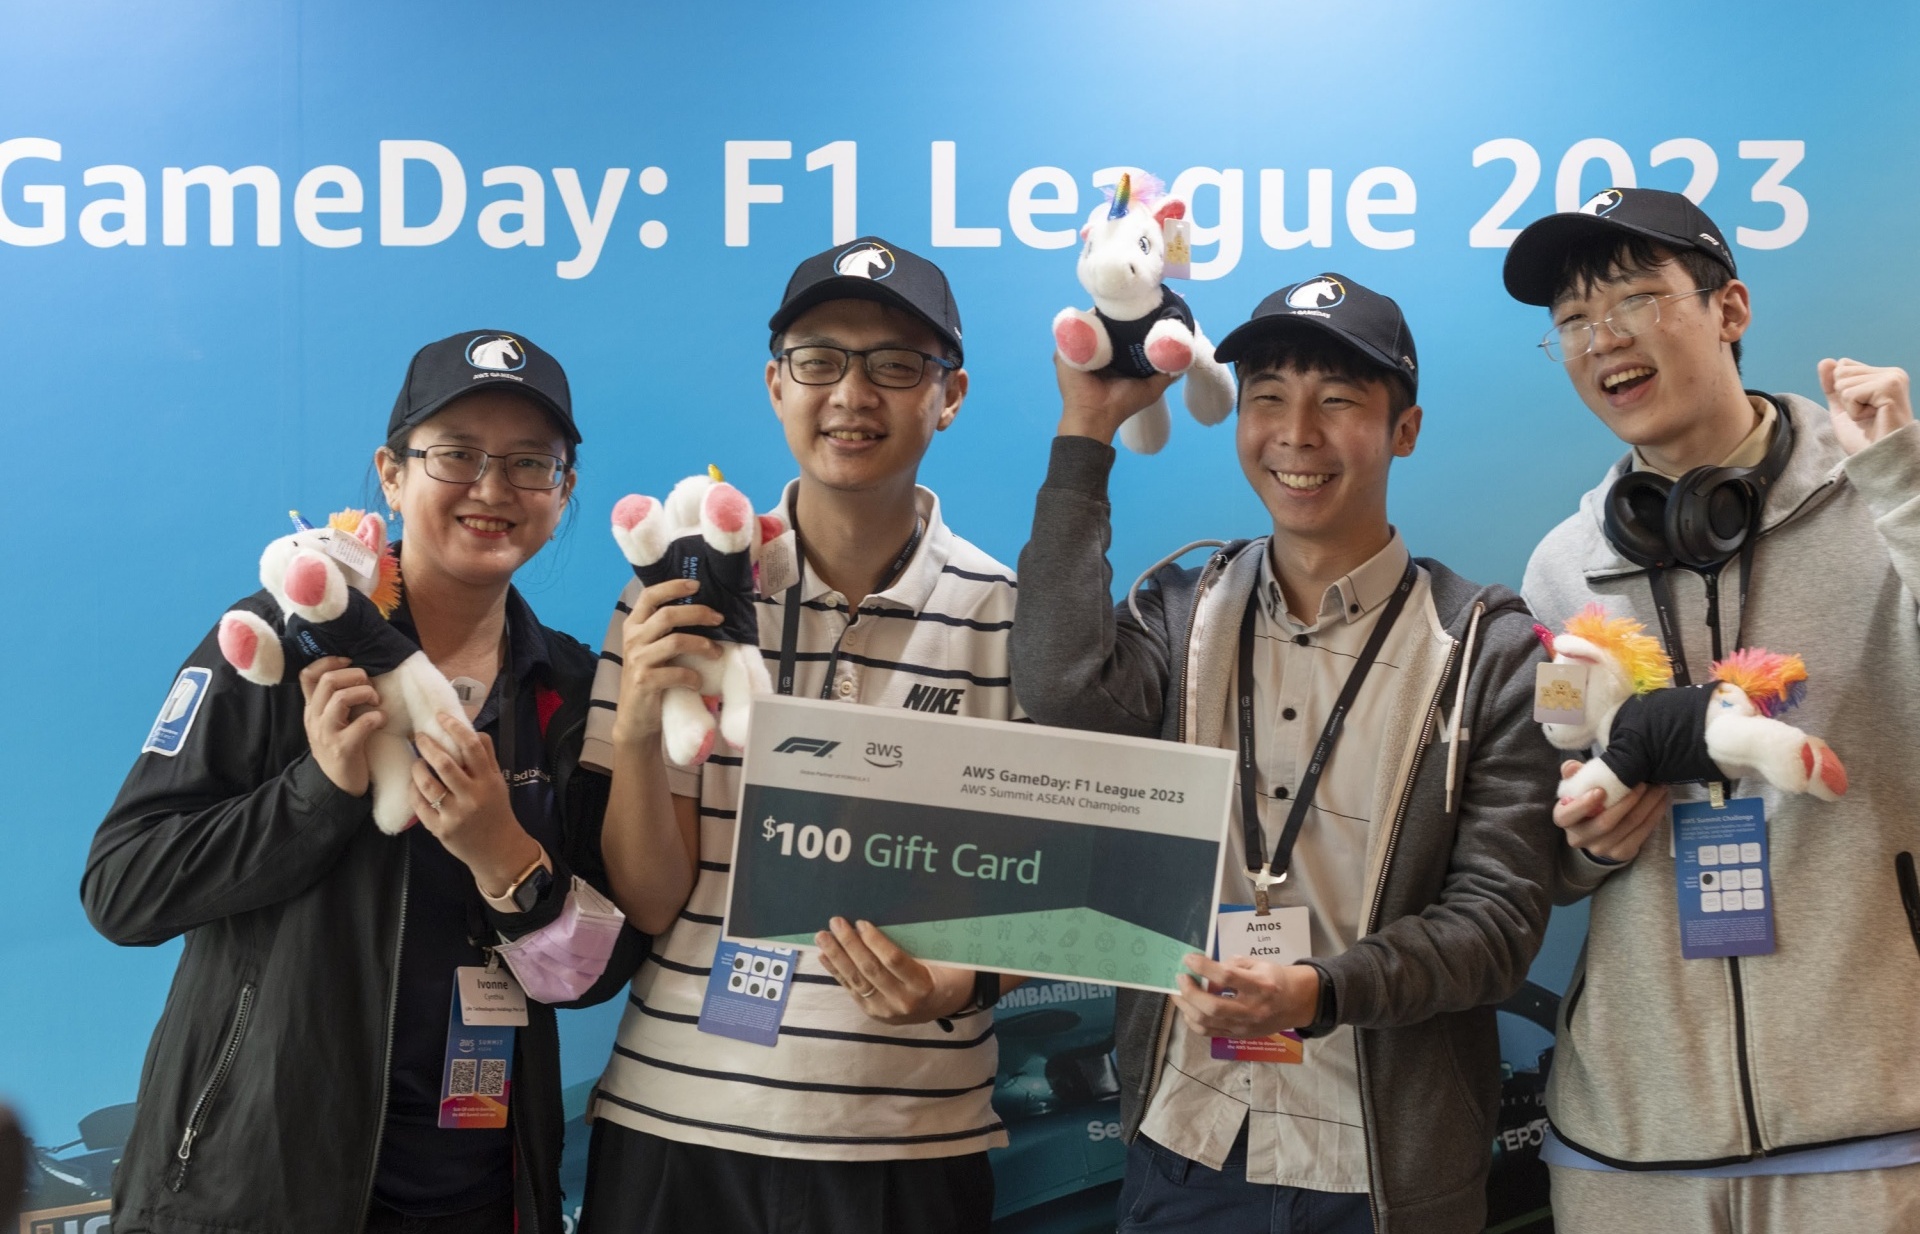 Improving digital skills with AWS GameDay: F1 League 2023